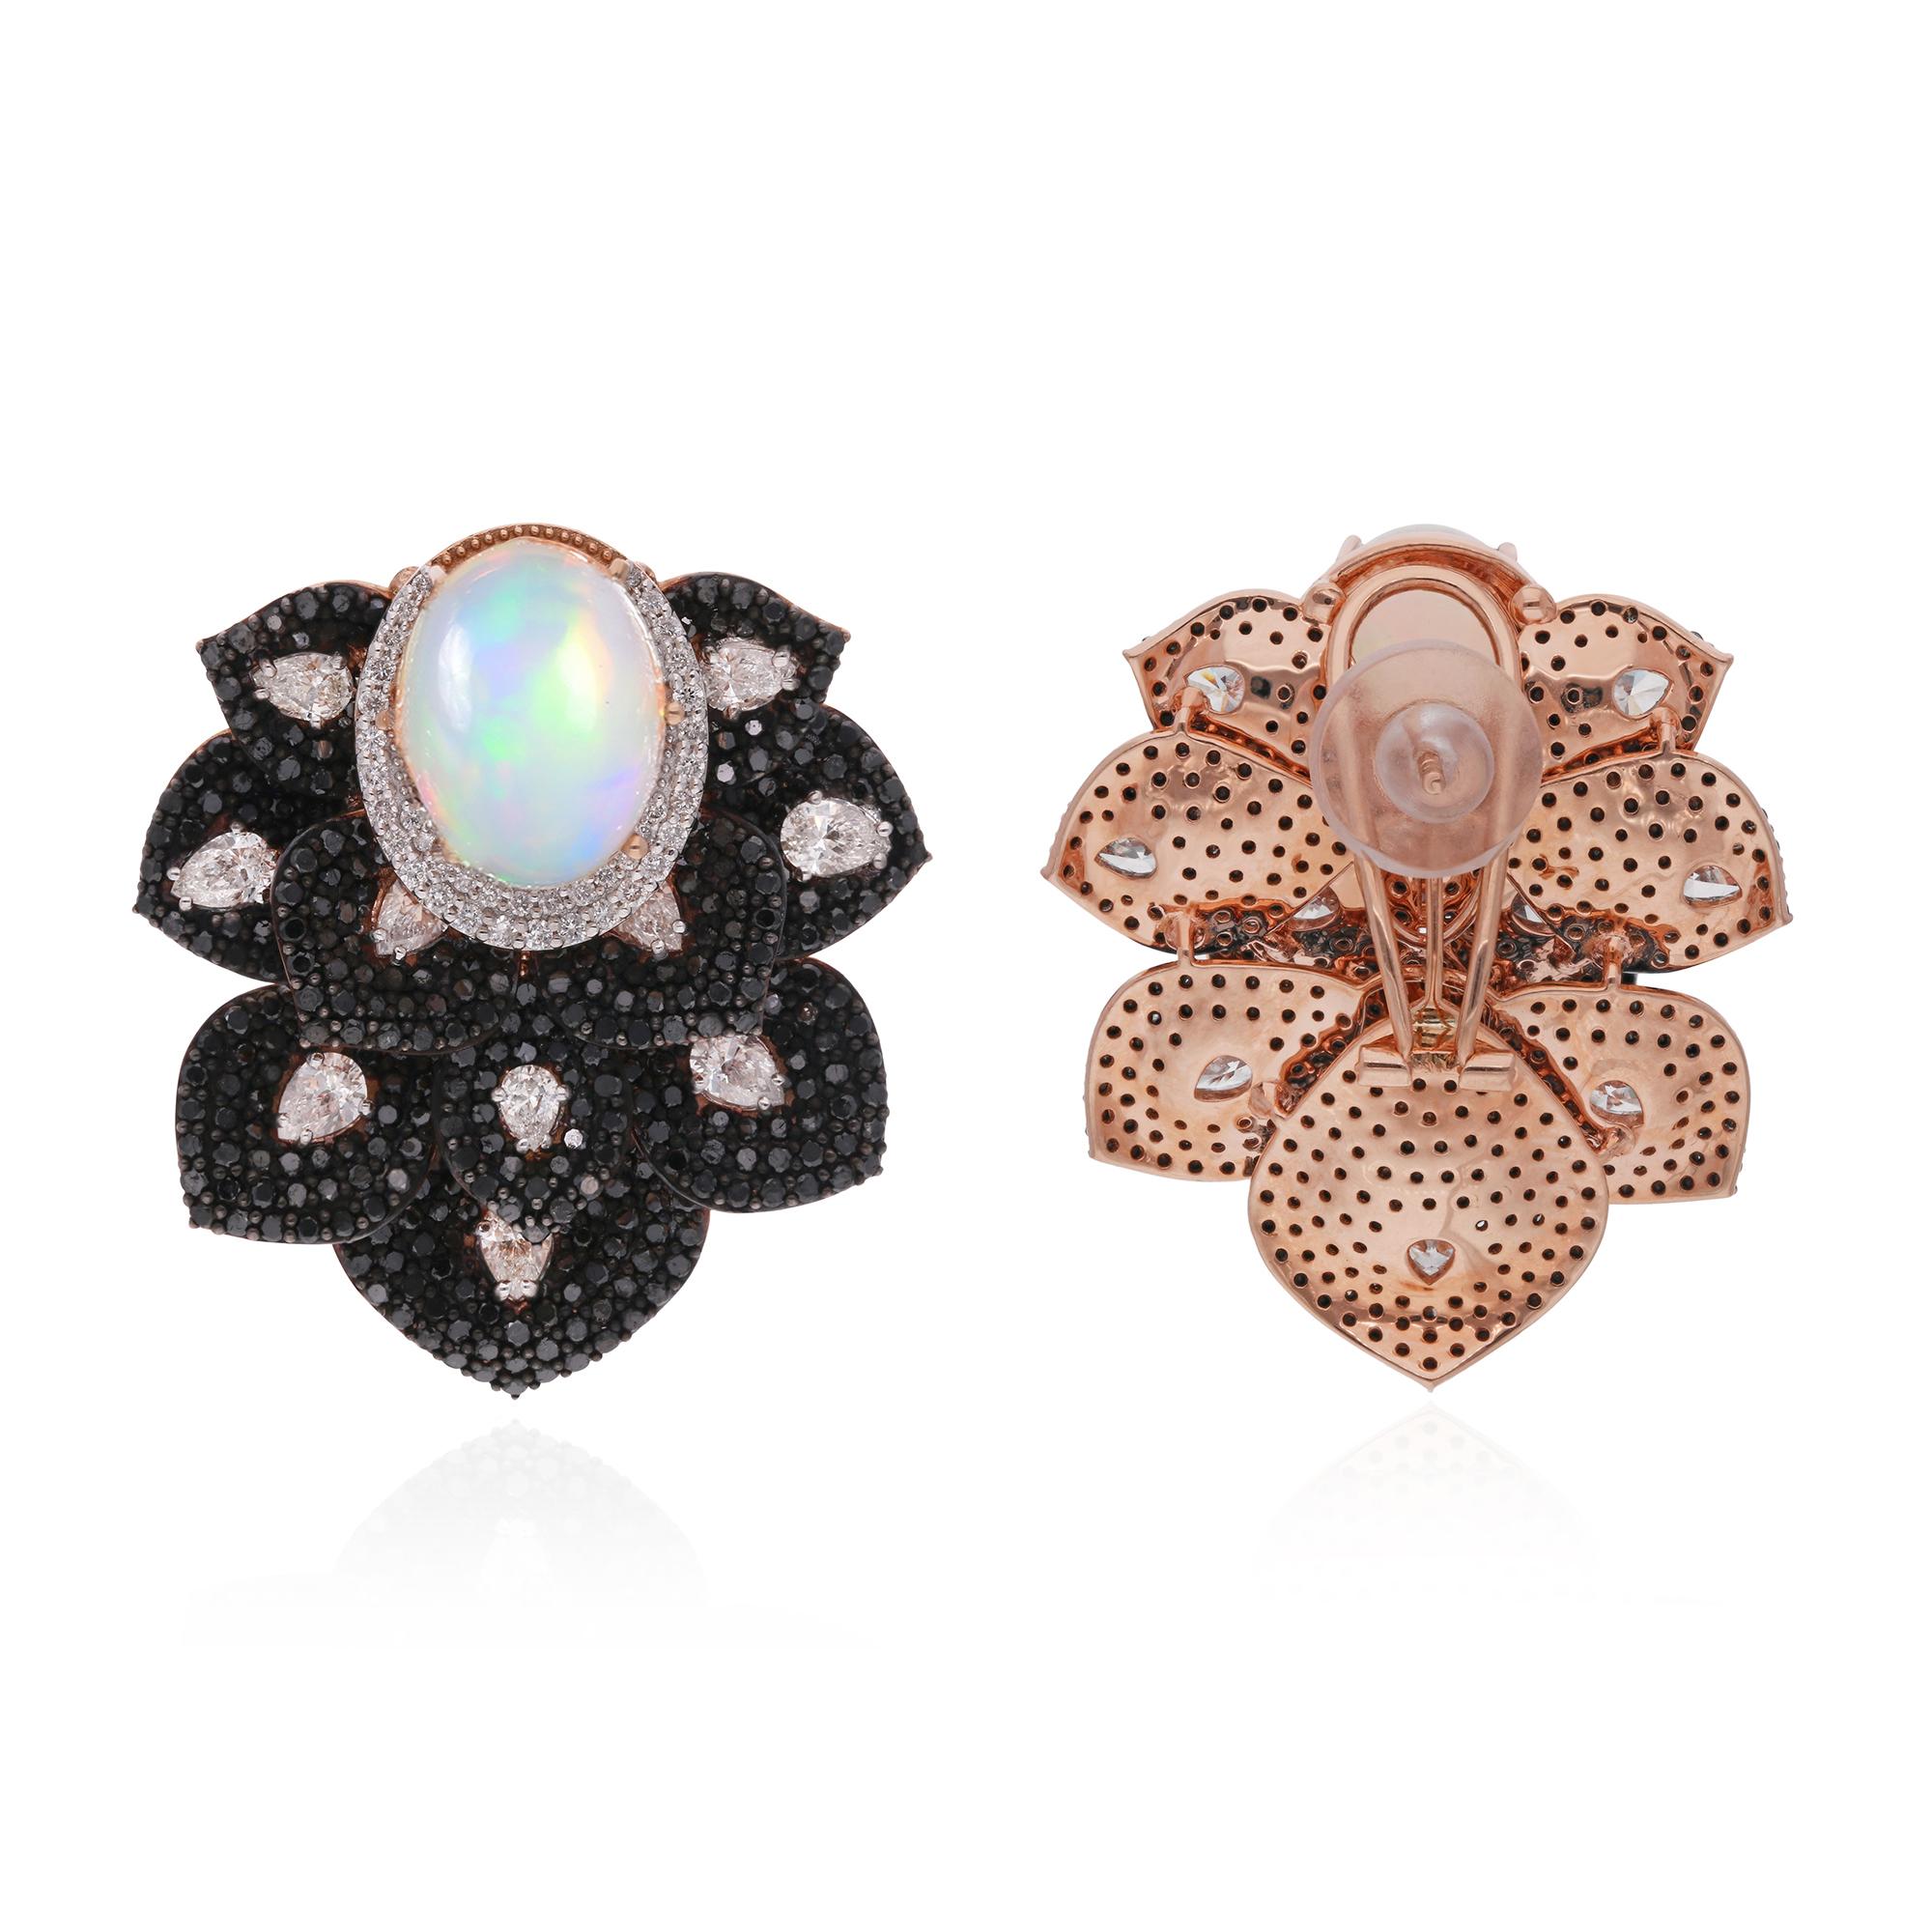 Crafted with precision and attention to detail, these stud earrings exude understated glamour and charm. The warm tones of the rose gold setting complement the ethereal beauty of the opals, creating a harmonious composition that is both timeless and